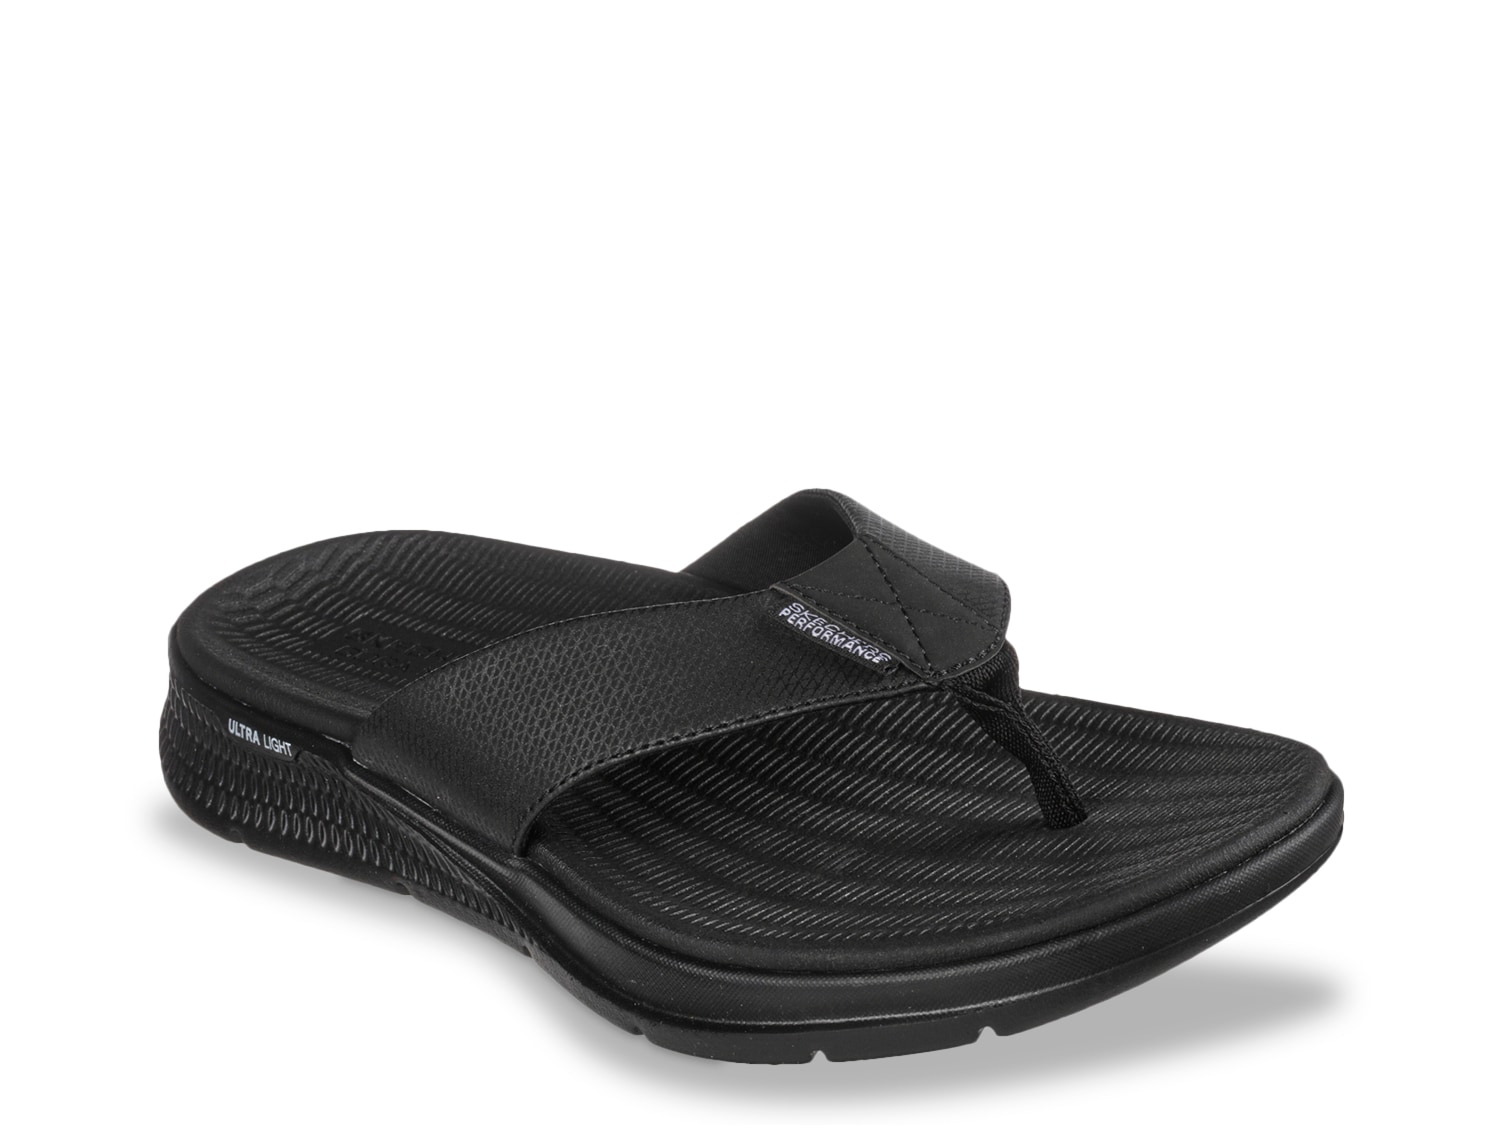 Skechers Go Consistent Flip Flop - Free Shipping | DSW